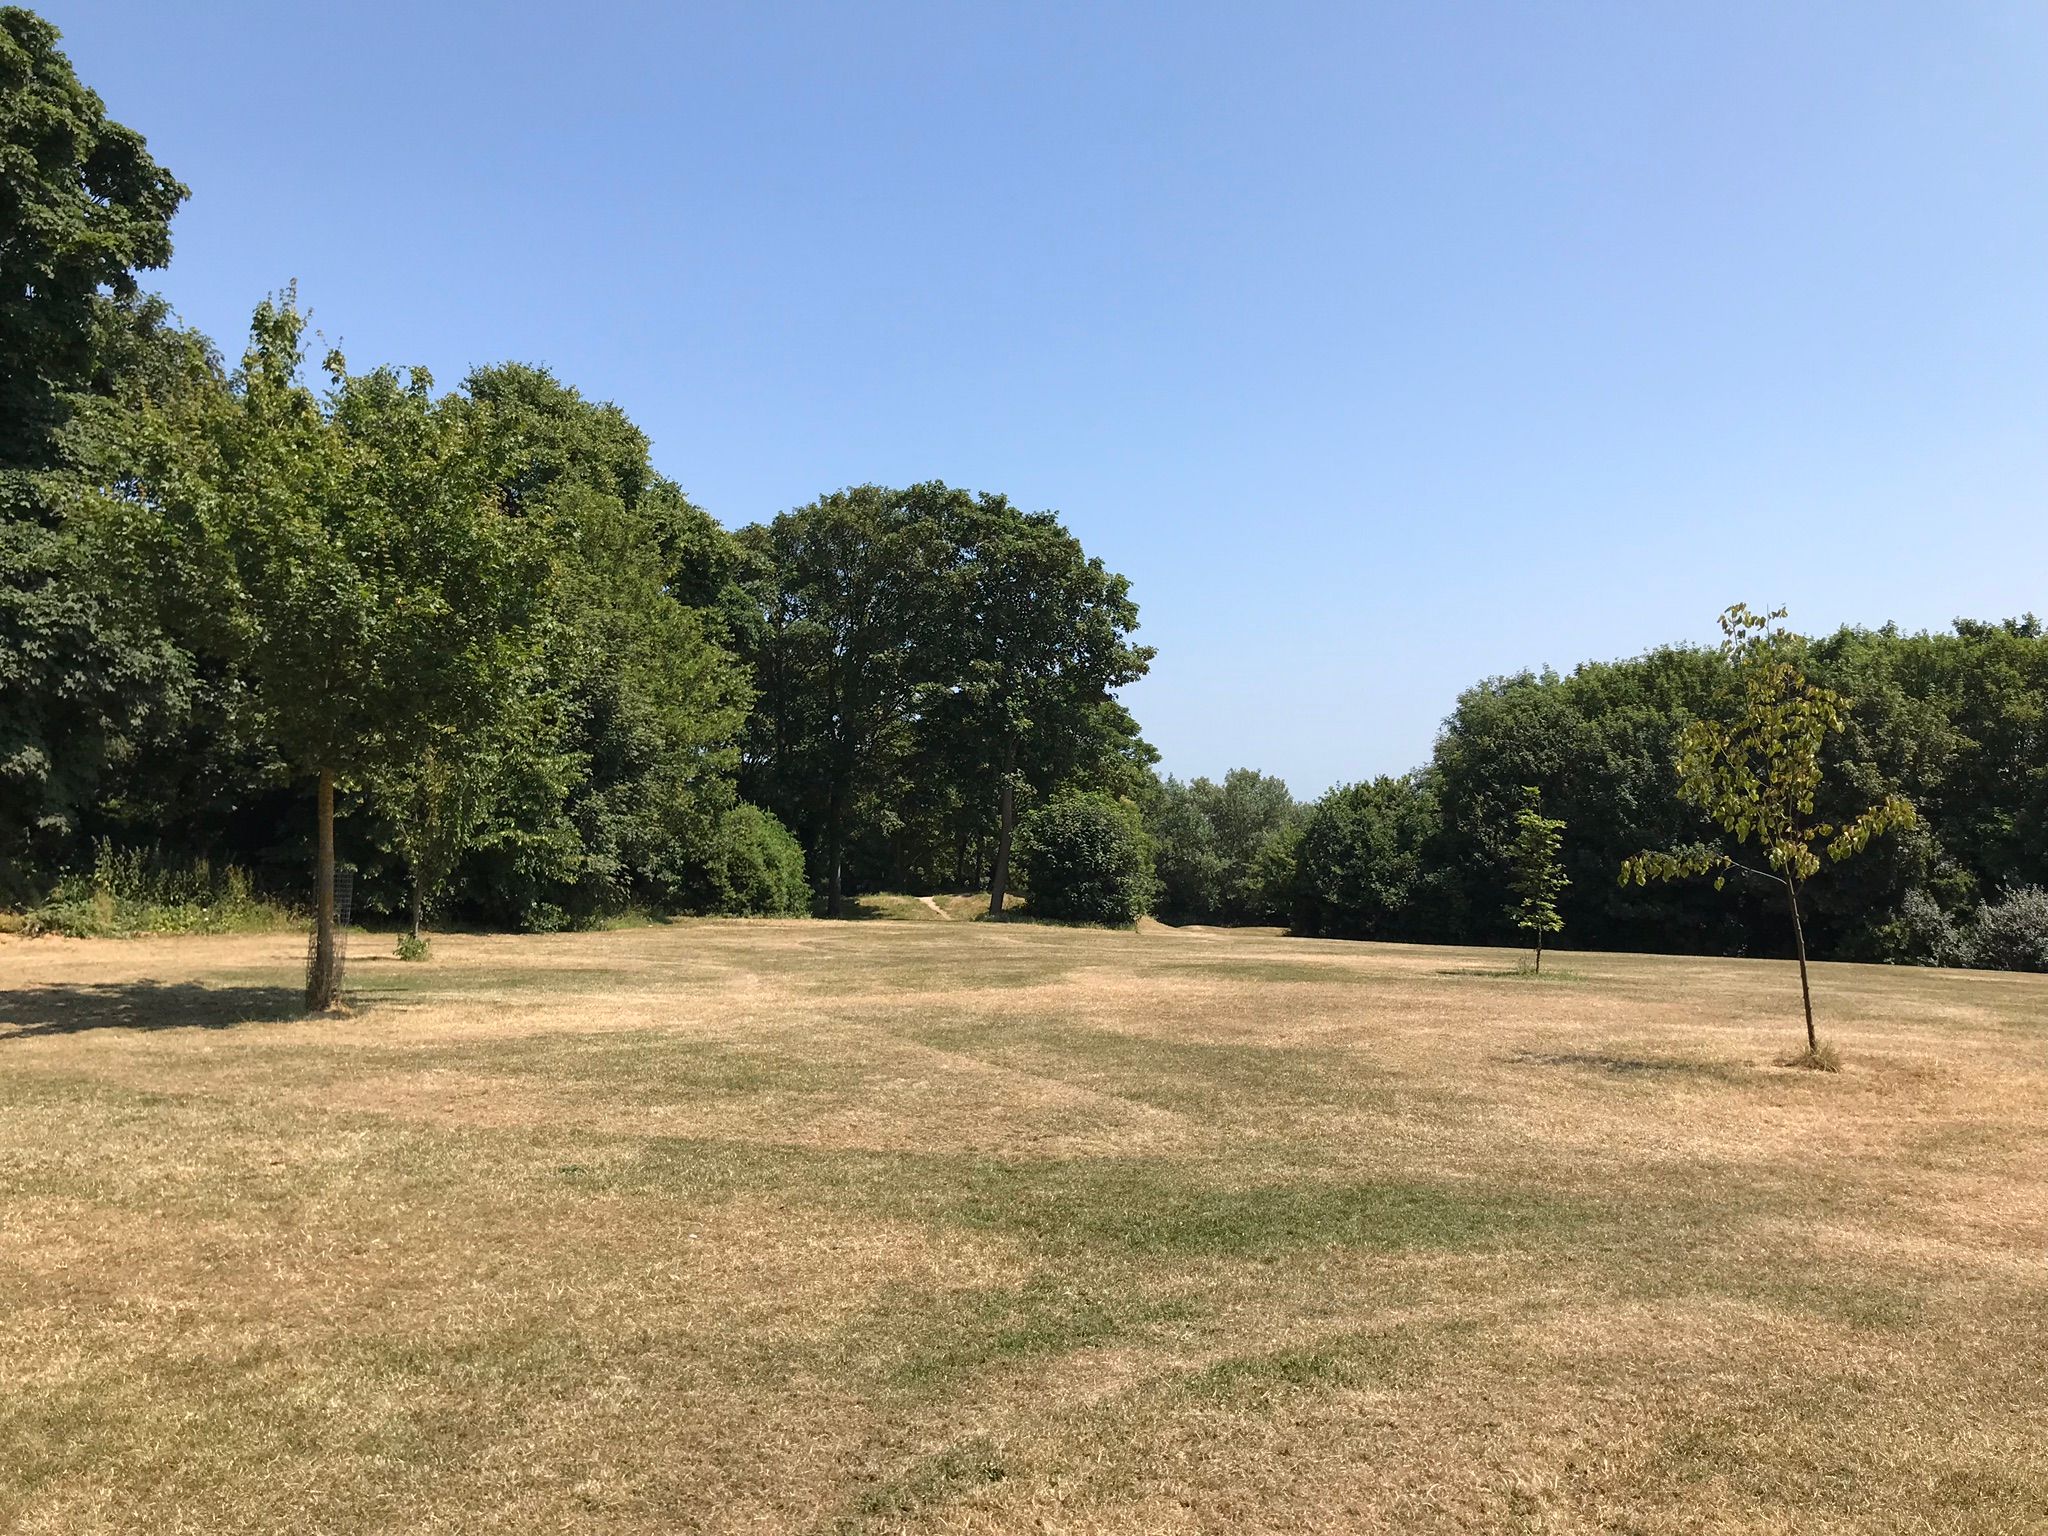 Wide green spaces in the King George VI Memorial Park, perfect for picnics and ball games